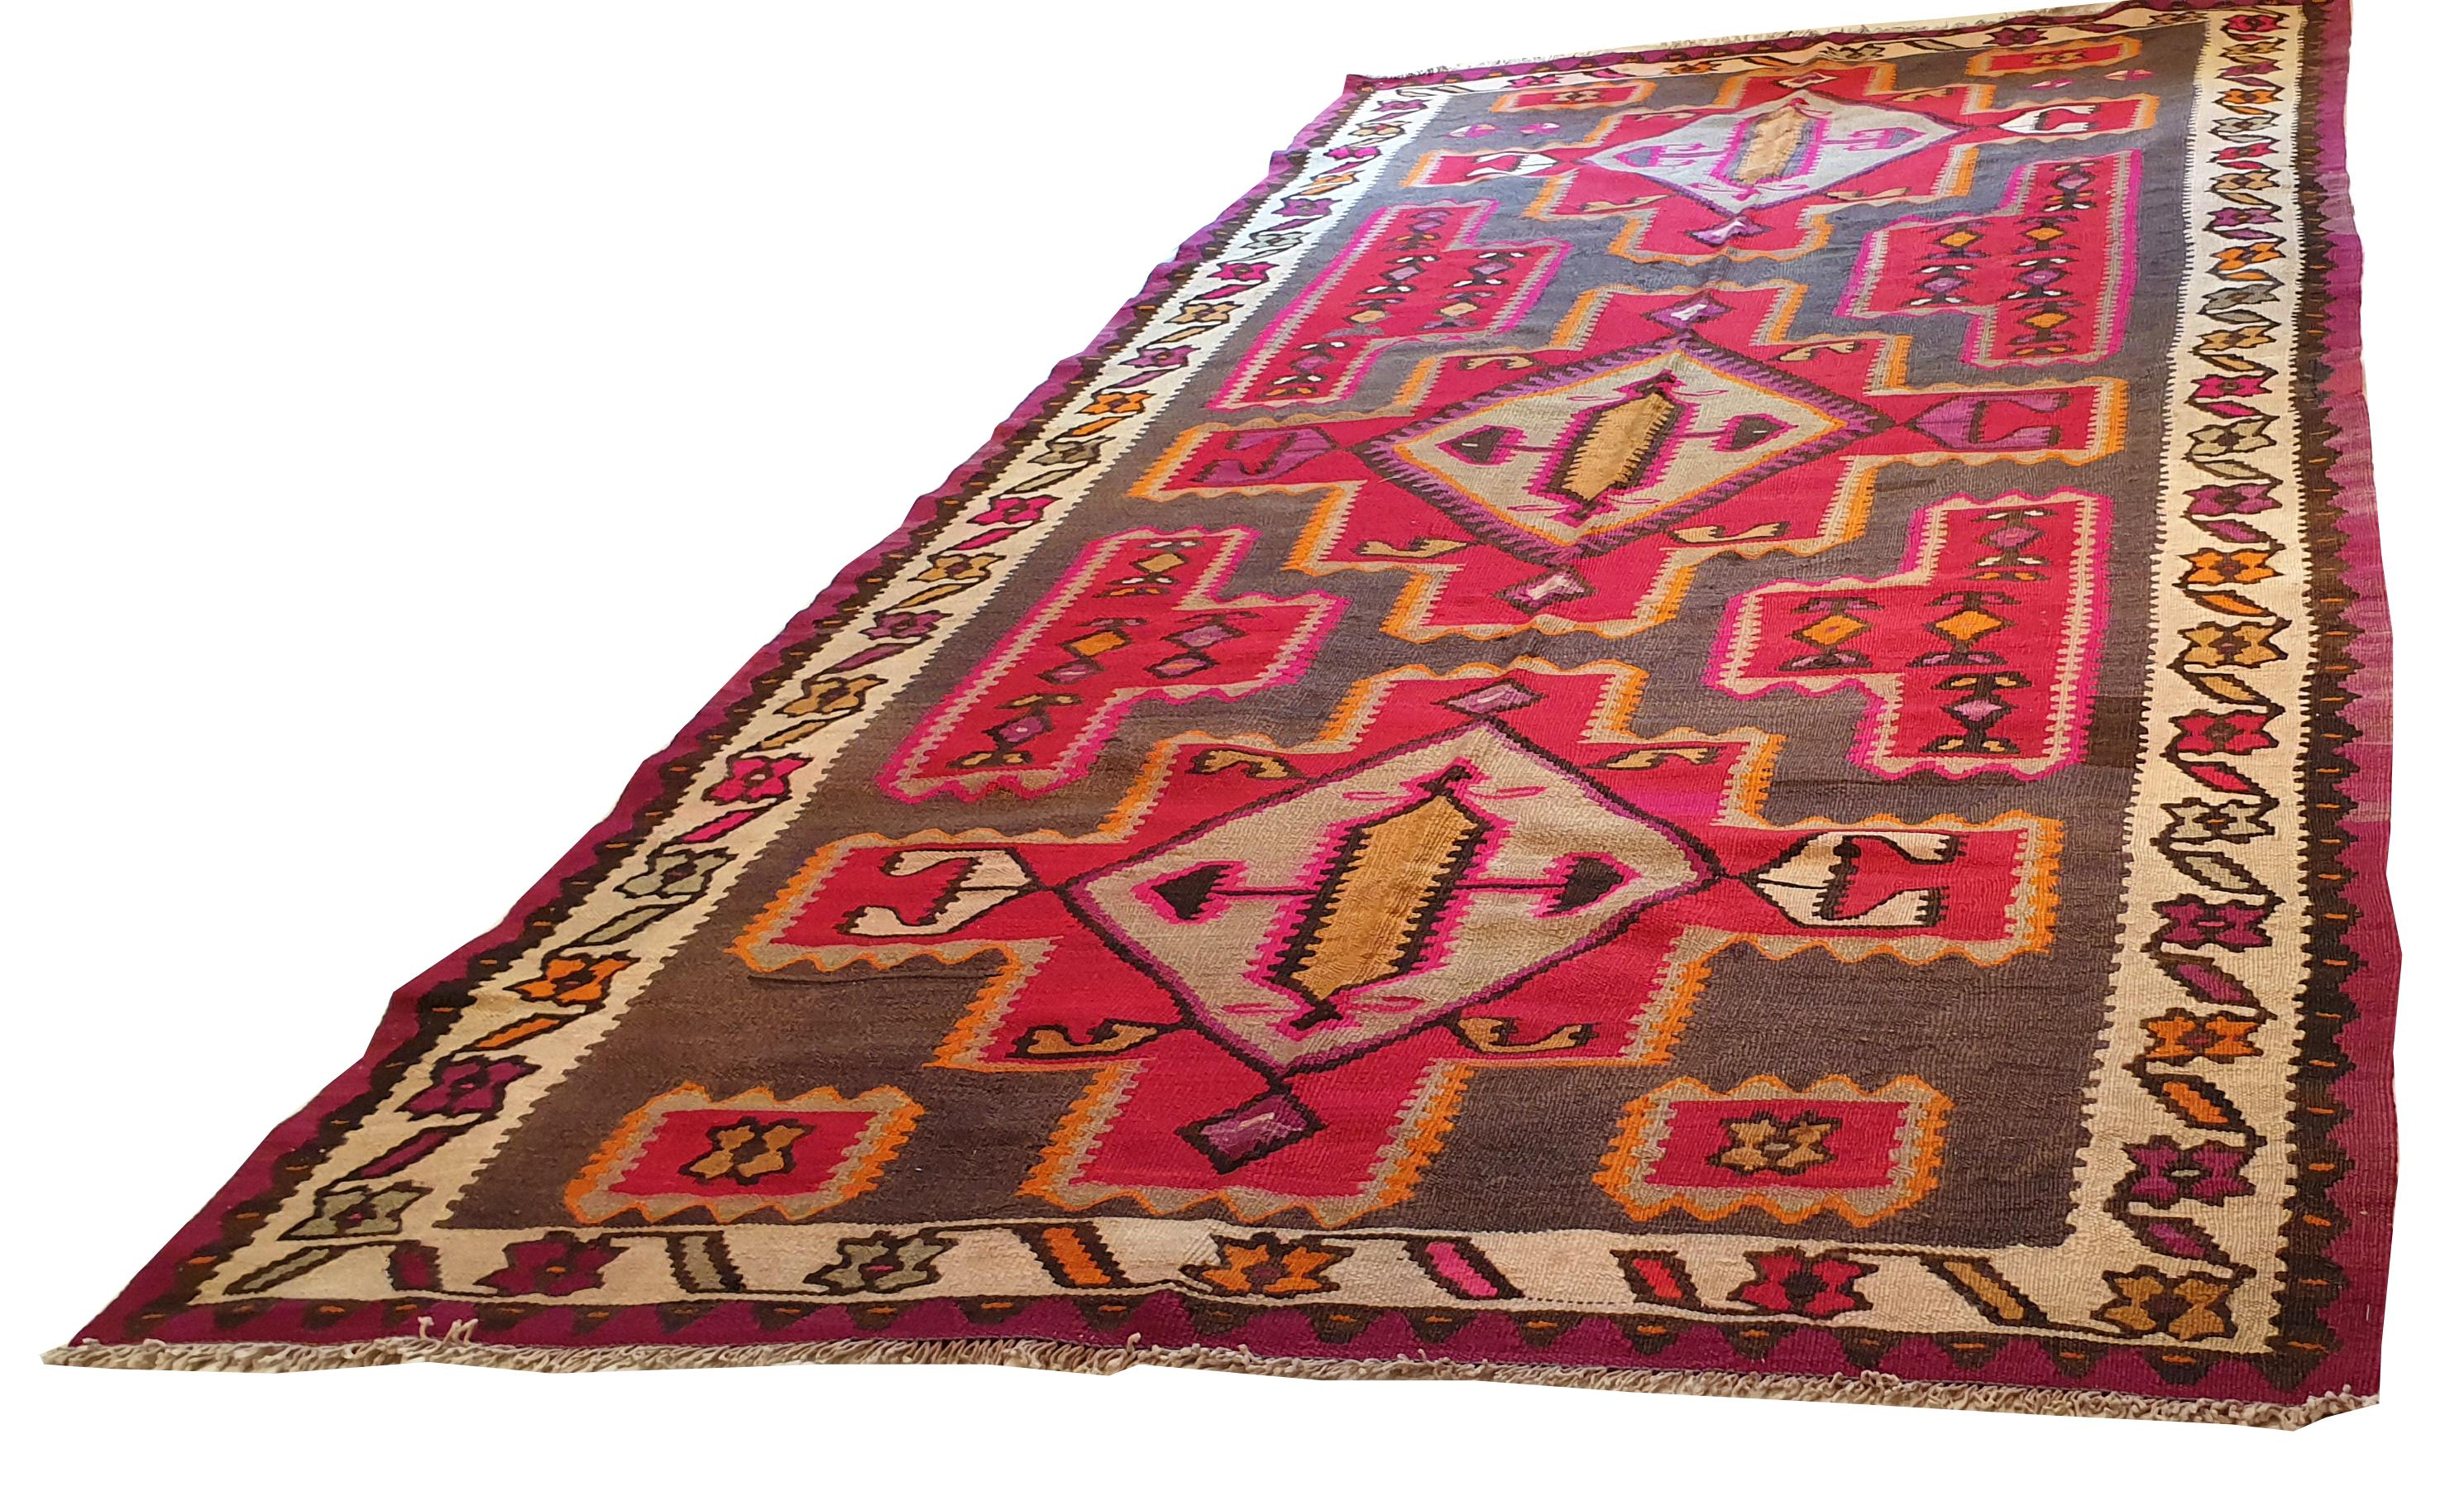 848 - very beautiful long Kilim mid-20th century, with a geometric design and an orange field color, entirely hand-woven with wool on a cotton foundation.